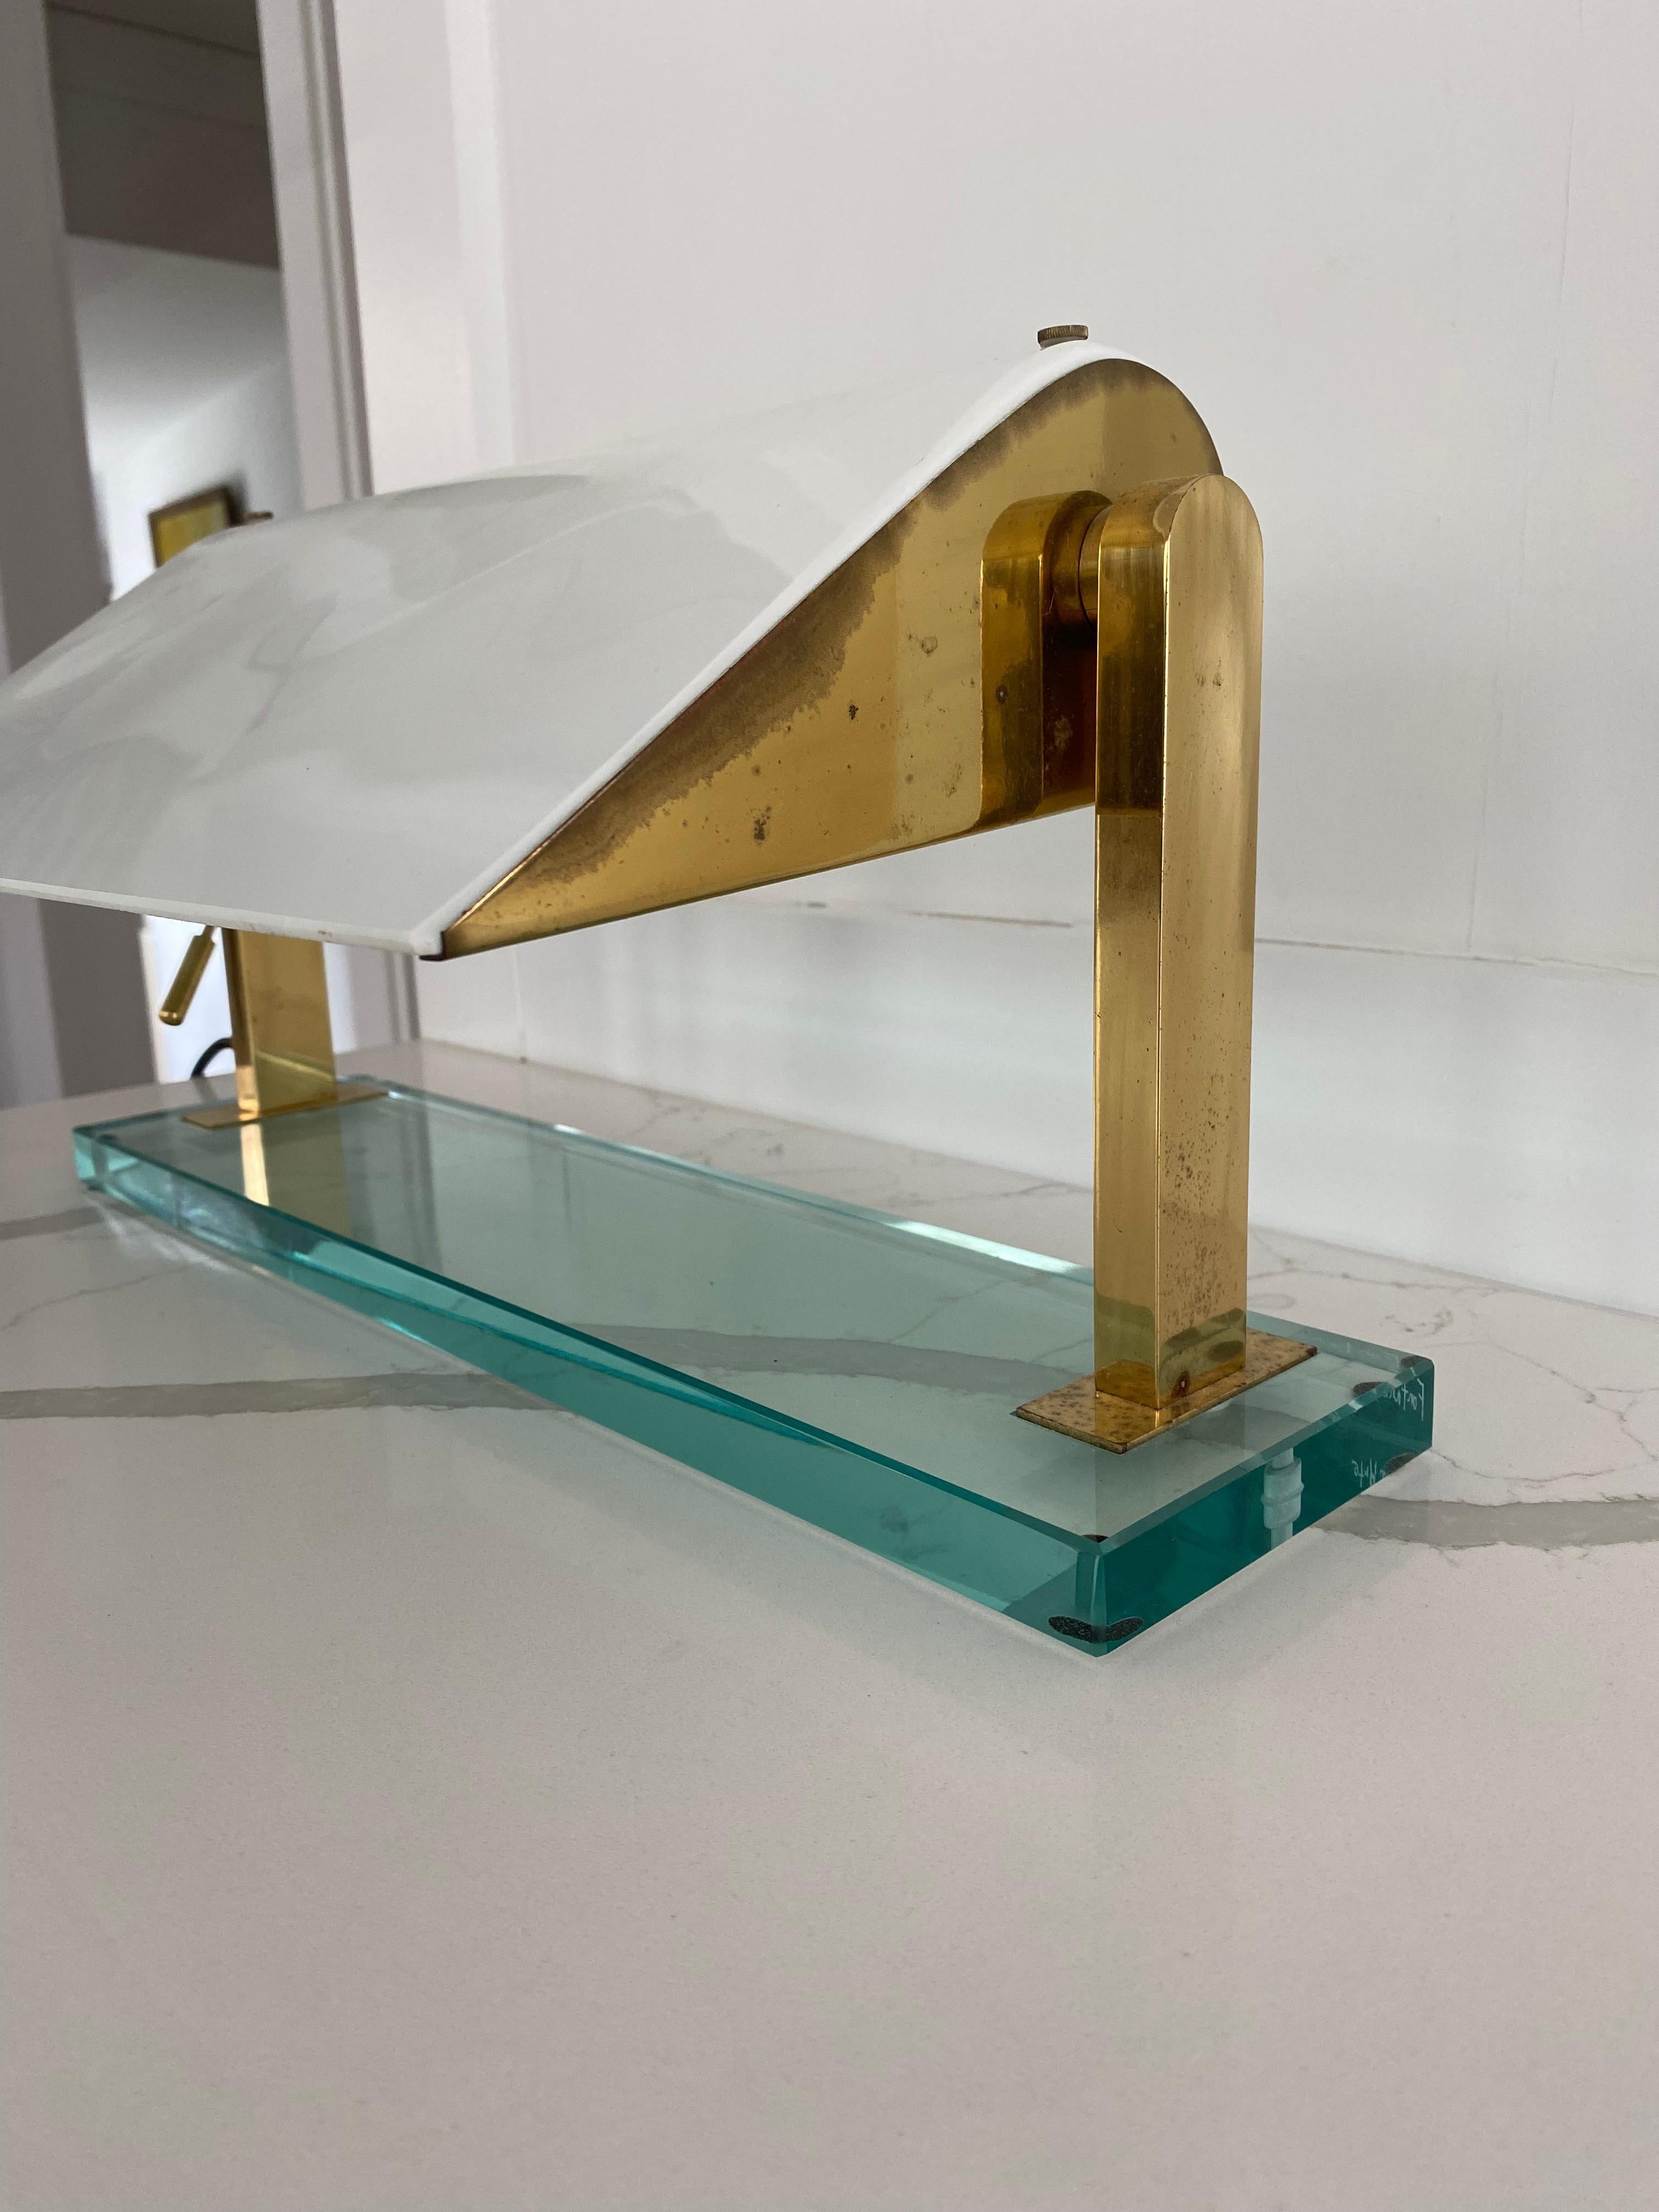 MODEL 0836 desk lamp by Cheese for Fontana Arte made of brass structure on crystal base with milk glass shade.

Glass shade rotates.

Base with etched signature 